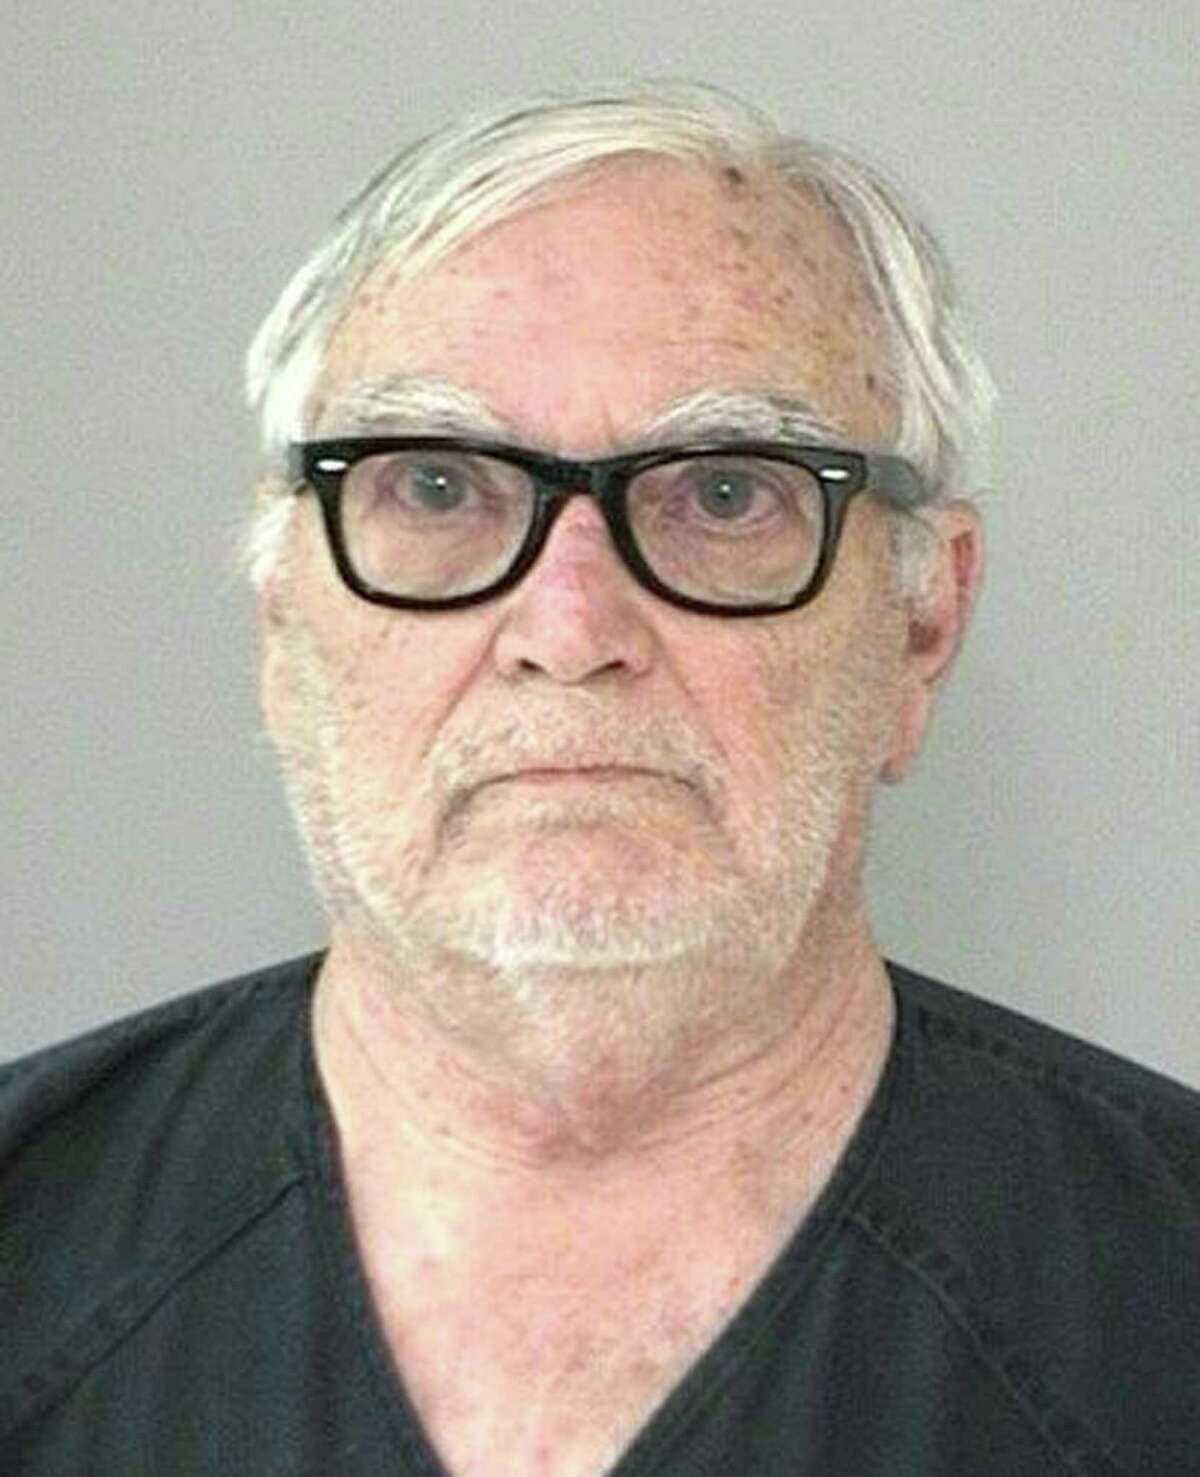 This undated photo provided by the Fort Bend County Sheriff's Office shows Donnie Rudd. Rudd has been arrested on a warrant charging him in the 1973 death of his wife in suburban Chicago. Rudd, who is 73, was being held Friday Dec. 18, 2015 on $1 million bond at the Fort Bend County Jail outside Houston after being arrested at his apartment in Sugar Land, Texas. (Fort Bend County Sheriff's Office via AP, File)